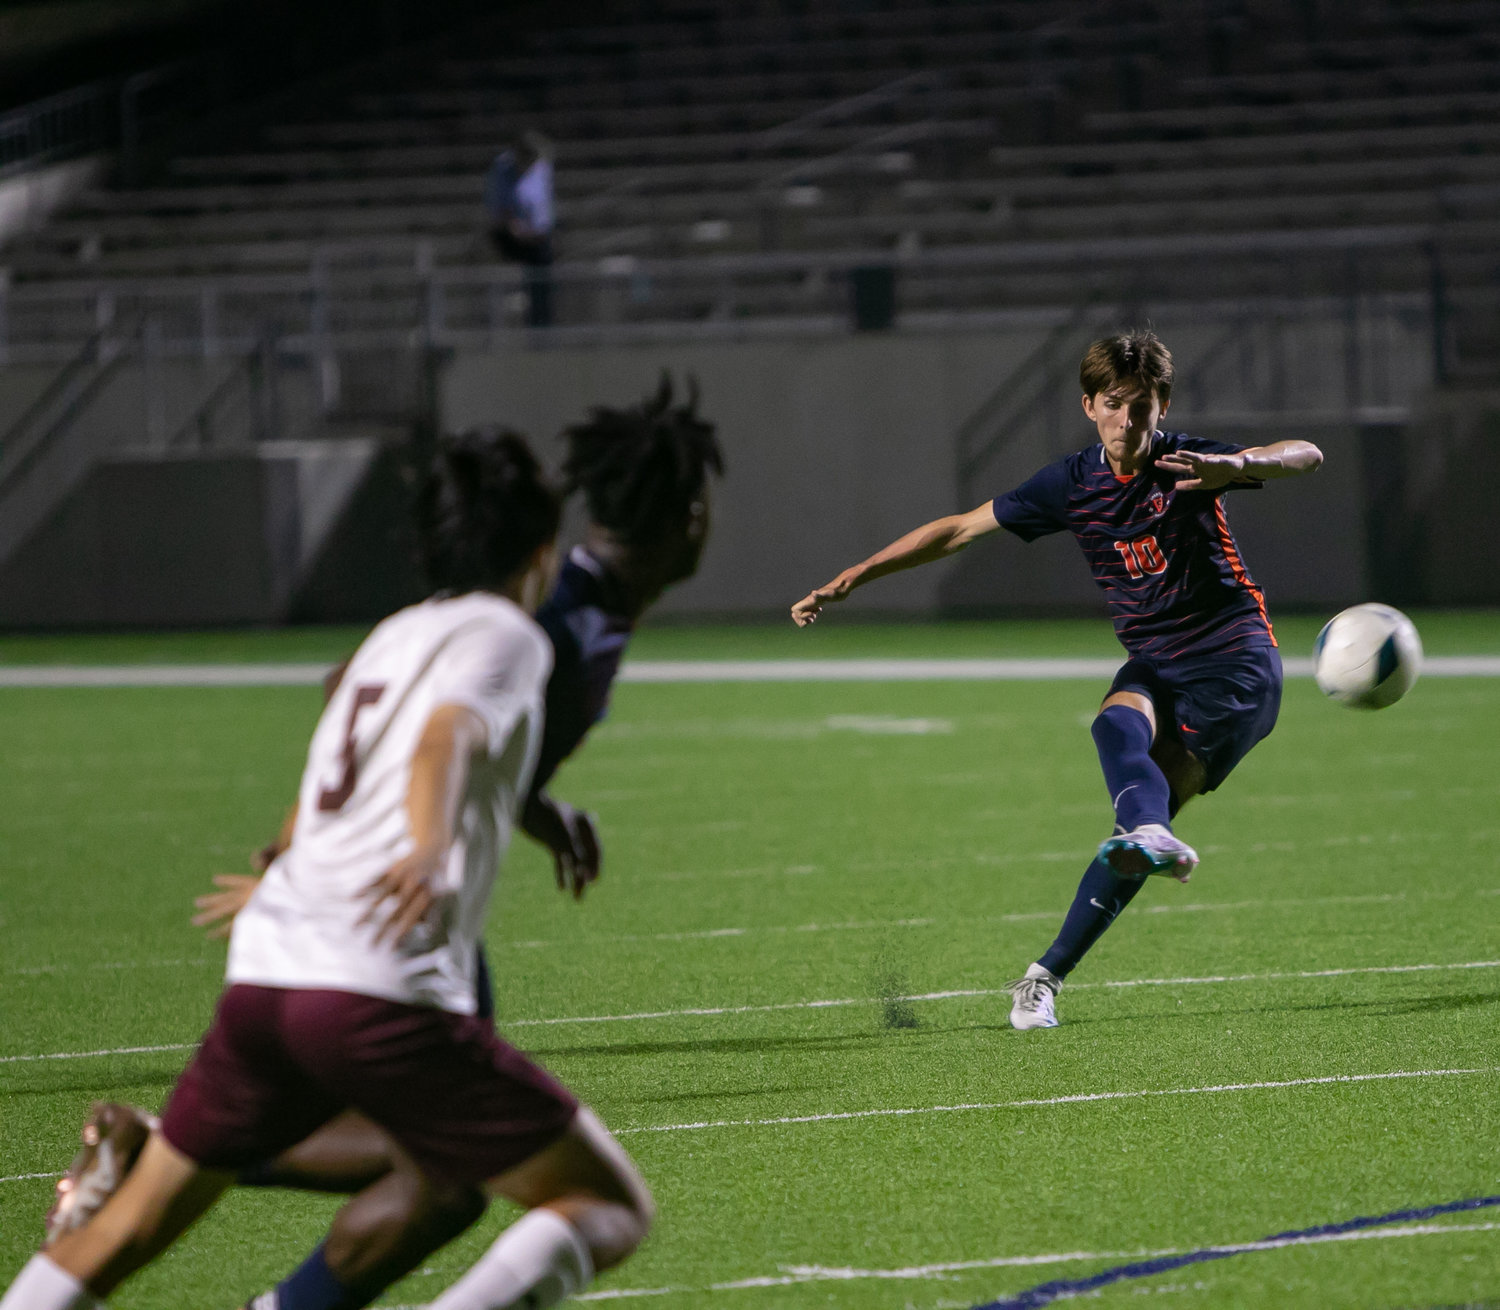 Aidan Morrison takes a free kick during Friday's Class 6A Regional Quarterfinal game between Seven Lakes and Cinco Ranch at Legacy Stadium.